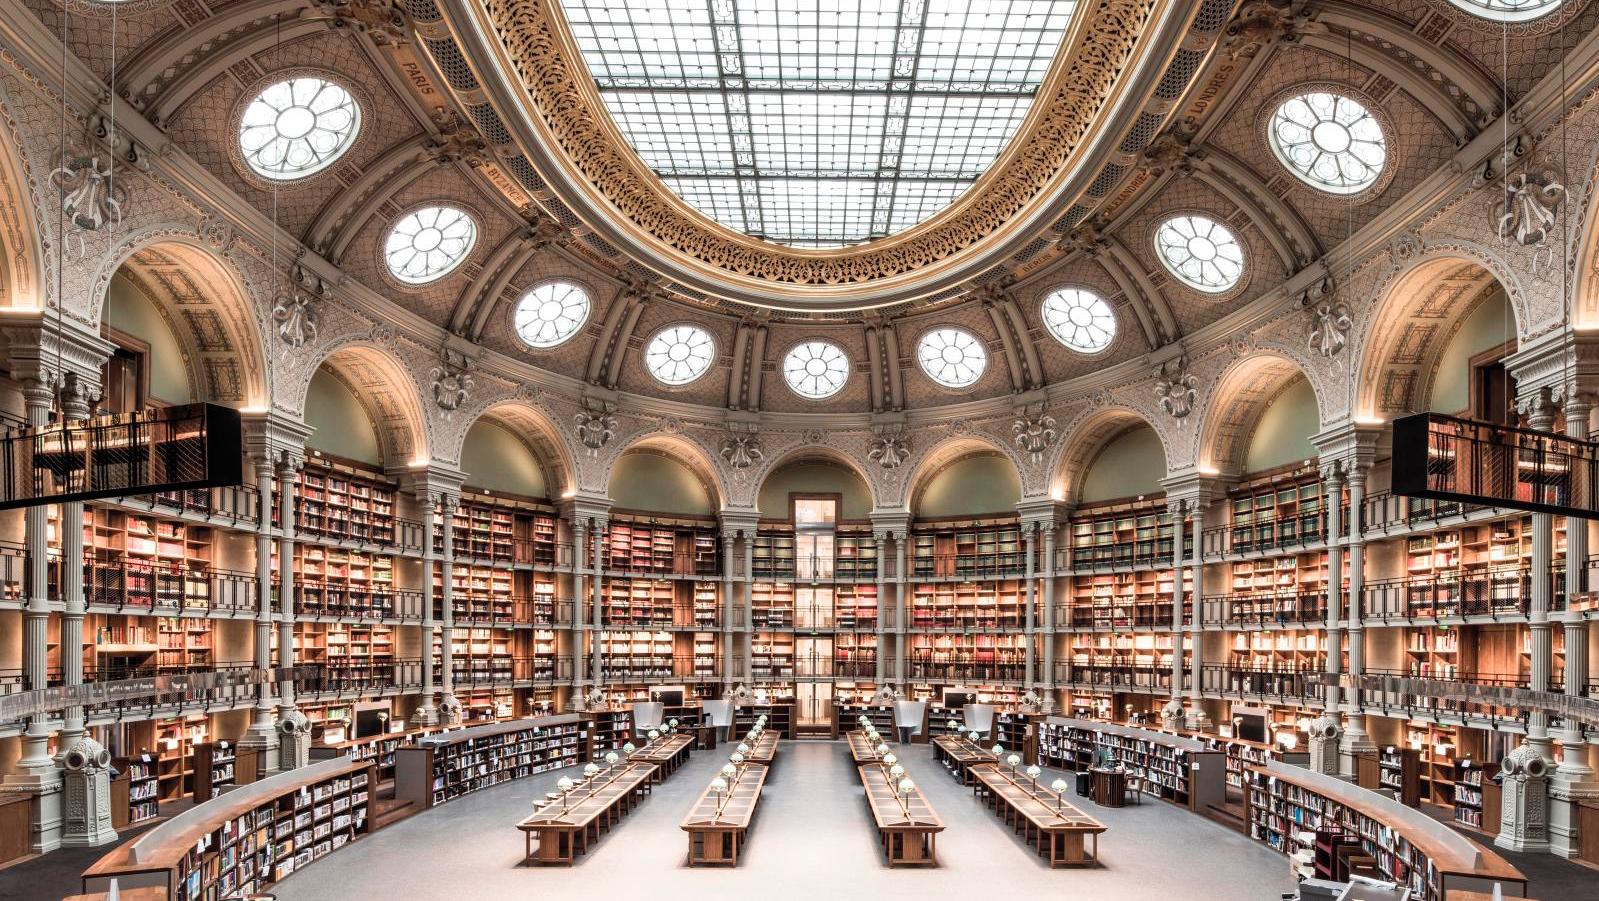 The newly renovated Oval Room.© Jean-Christophe Ballot - BnF - Oppic The Bibliothèque Nationale de France: A Renaissance